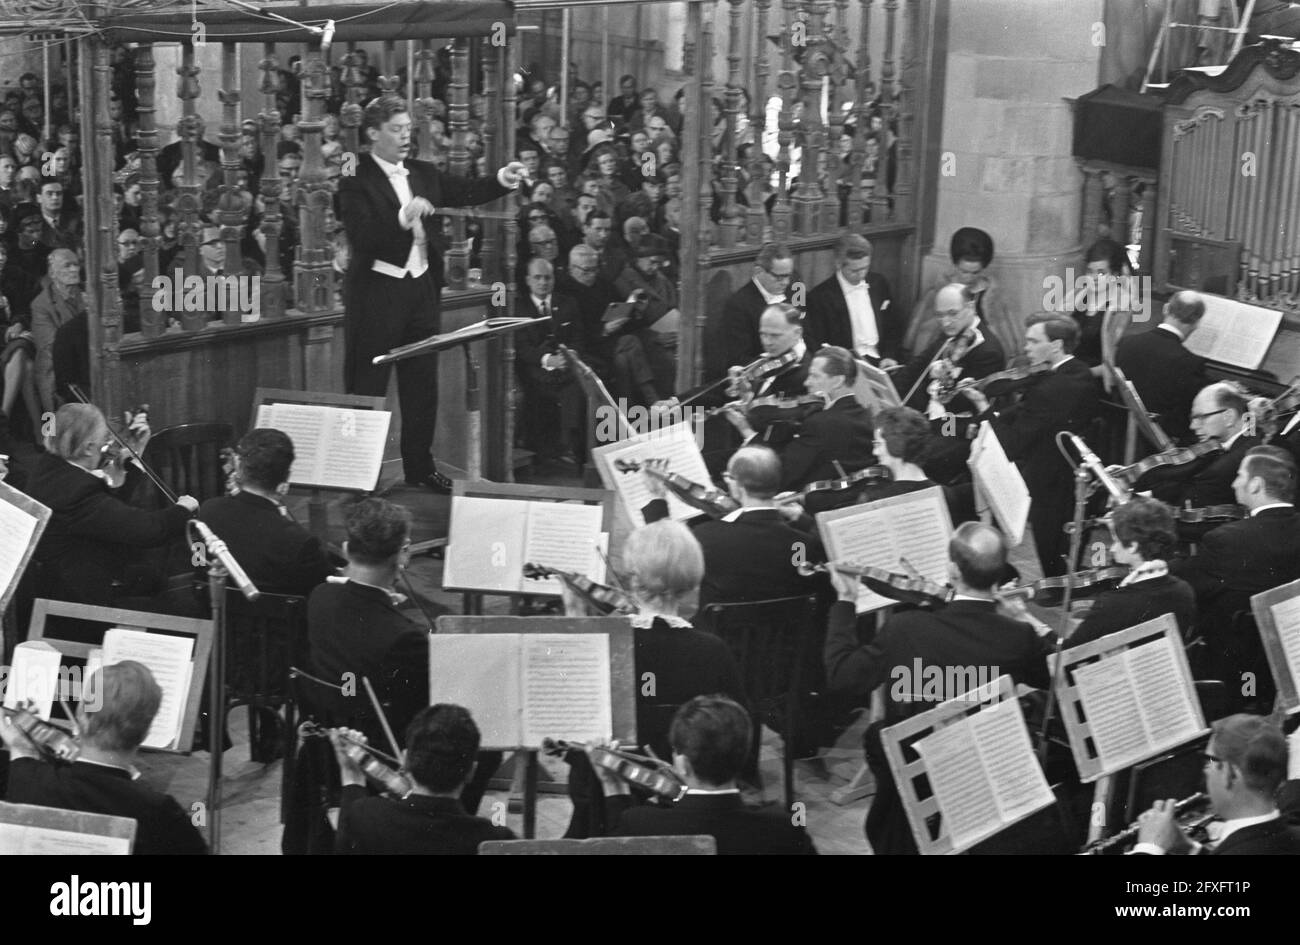 Performance of the St. Matthew Passion in the Grote Kerk in Naarden, the Netherlands, April 12, 1968, churches, orchestras, The Netherlands, 20th century press agency photo, news to remember, documentary, historic photography 1945-1990, visual stories, human history of the Twentieth Century, capturing moments in time Stock Photo